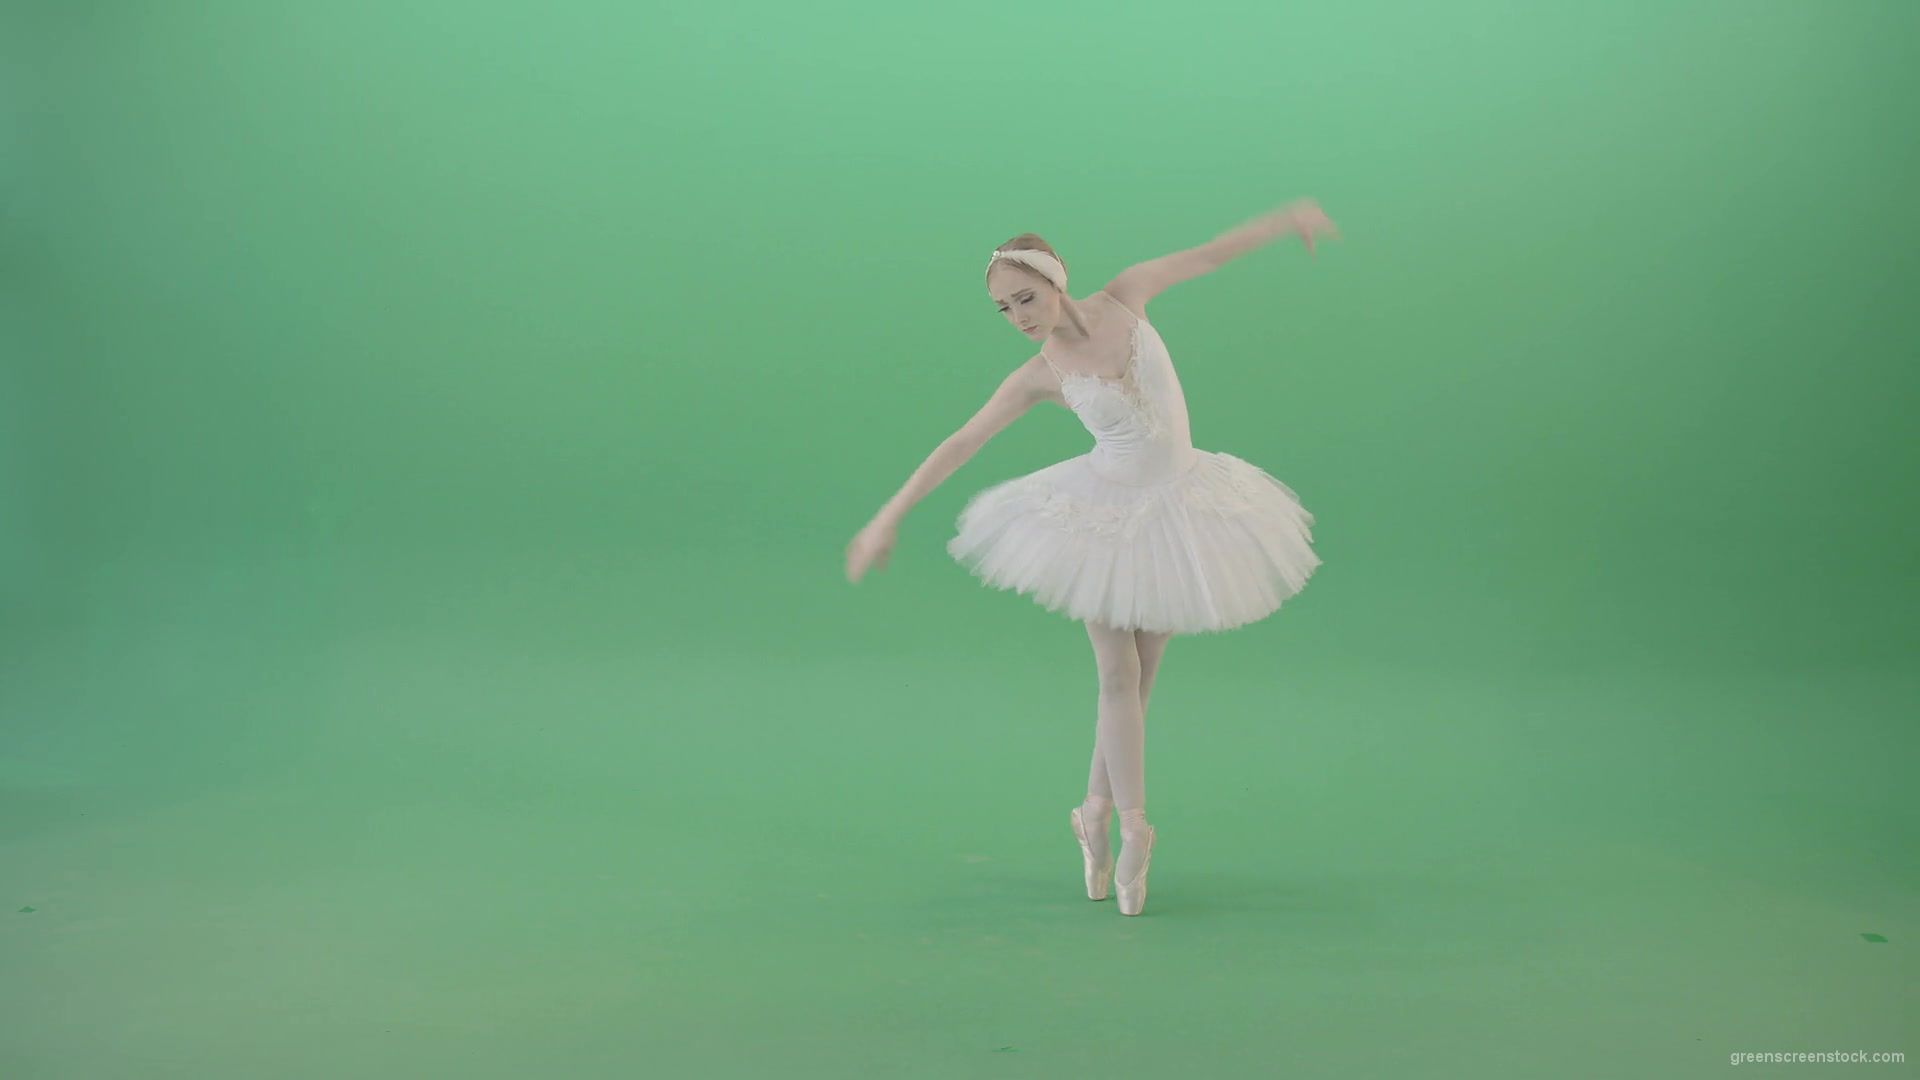 Back-side-view-ballet-dancing-tiny-girl-performs-in-green-screen-studio-4K-Video-Footage-1920_007 Green Screen Stock